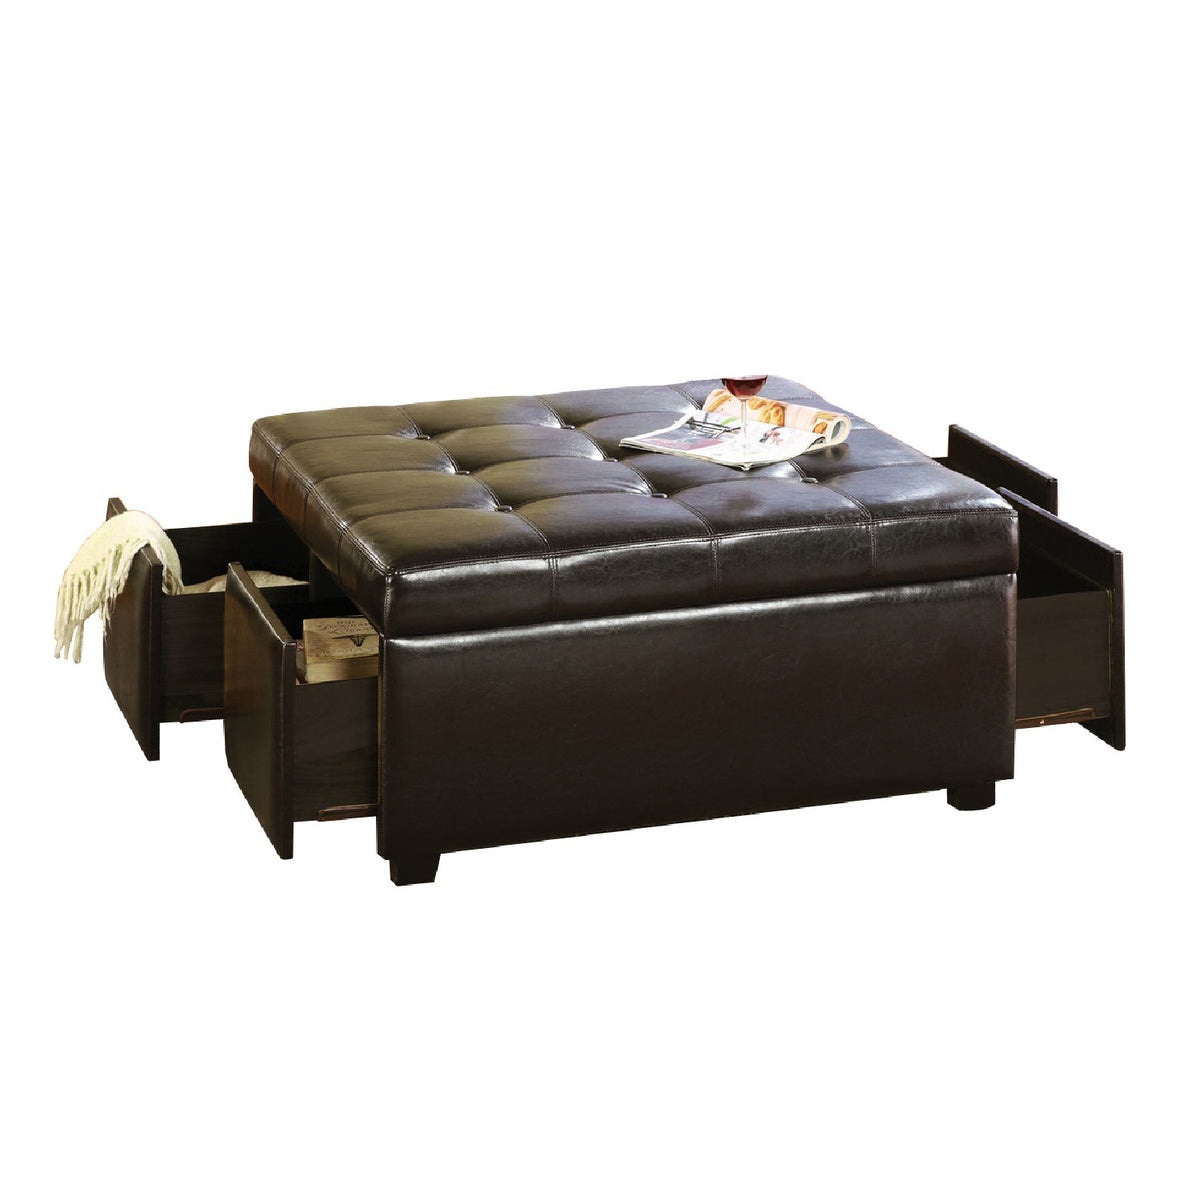 BM172777 Restful Contemporary Storage Ottoman With 4 Drawers, Brown